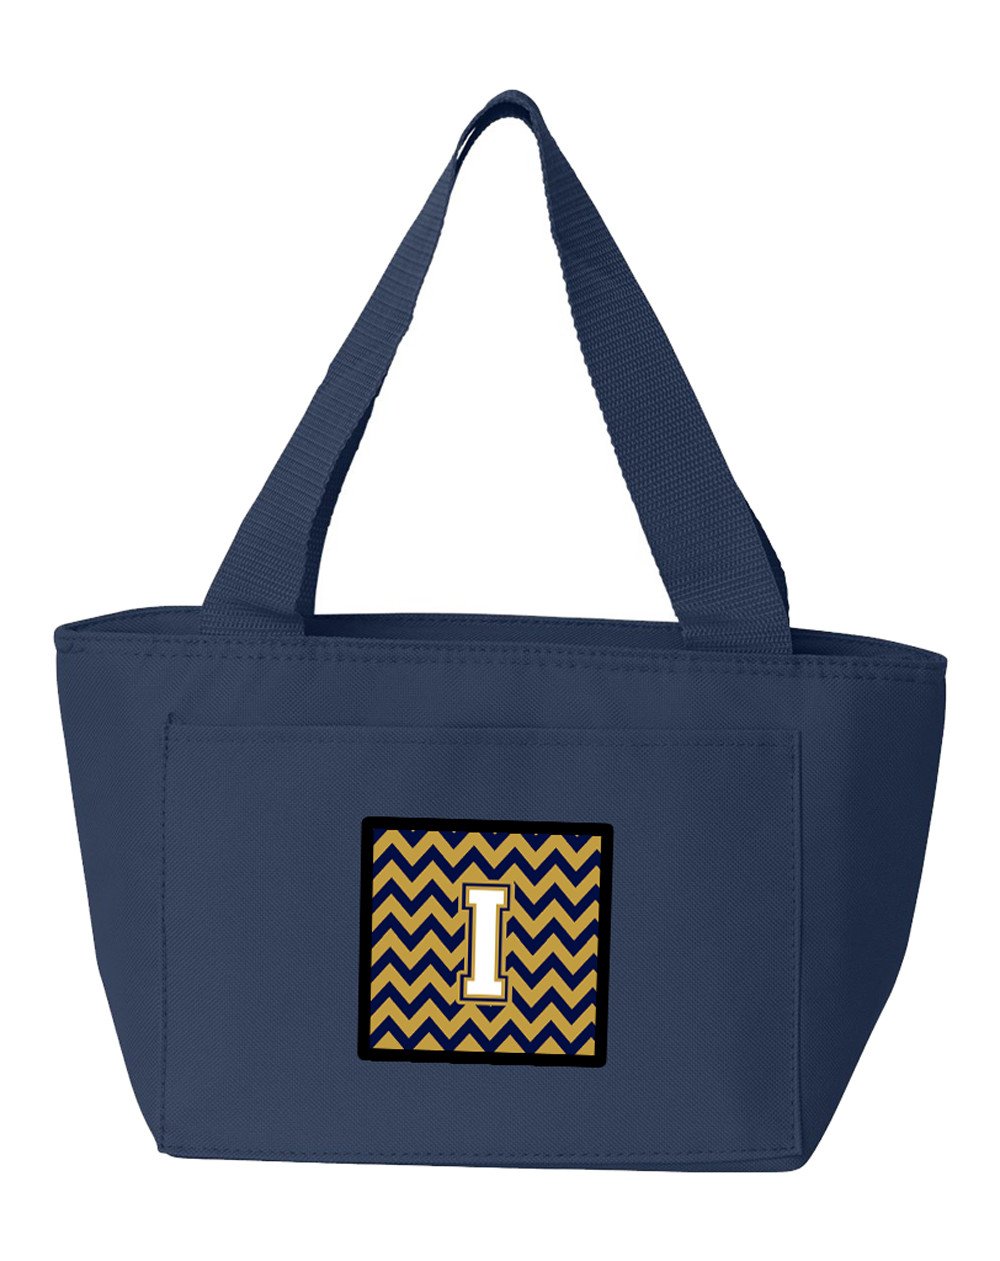 Letter I Chevron Navy Blue and Gold Lunch Bag CJ1057-INA-8808 by Caroline's Treasures